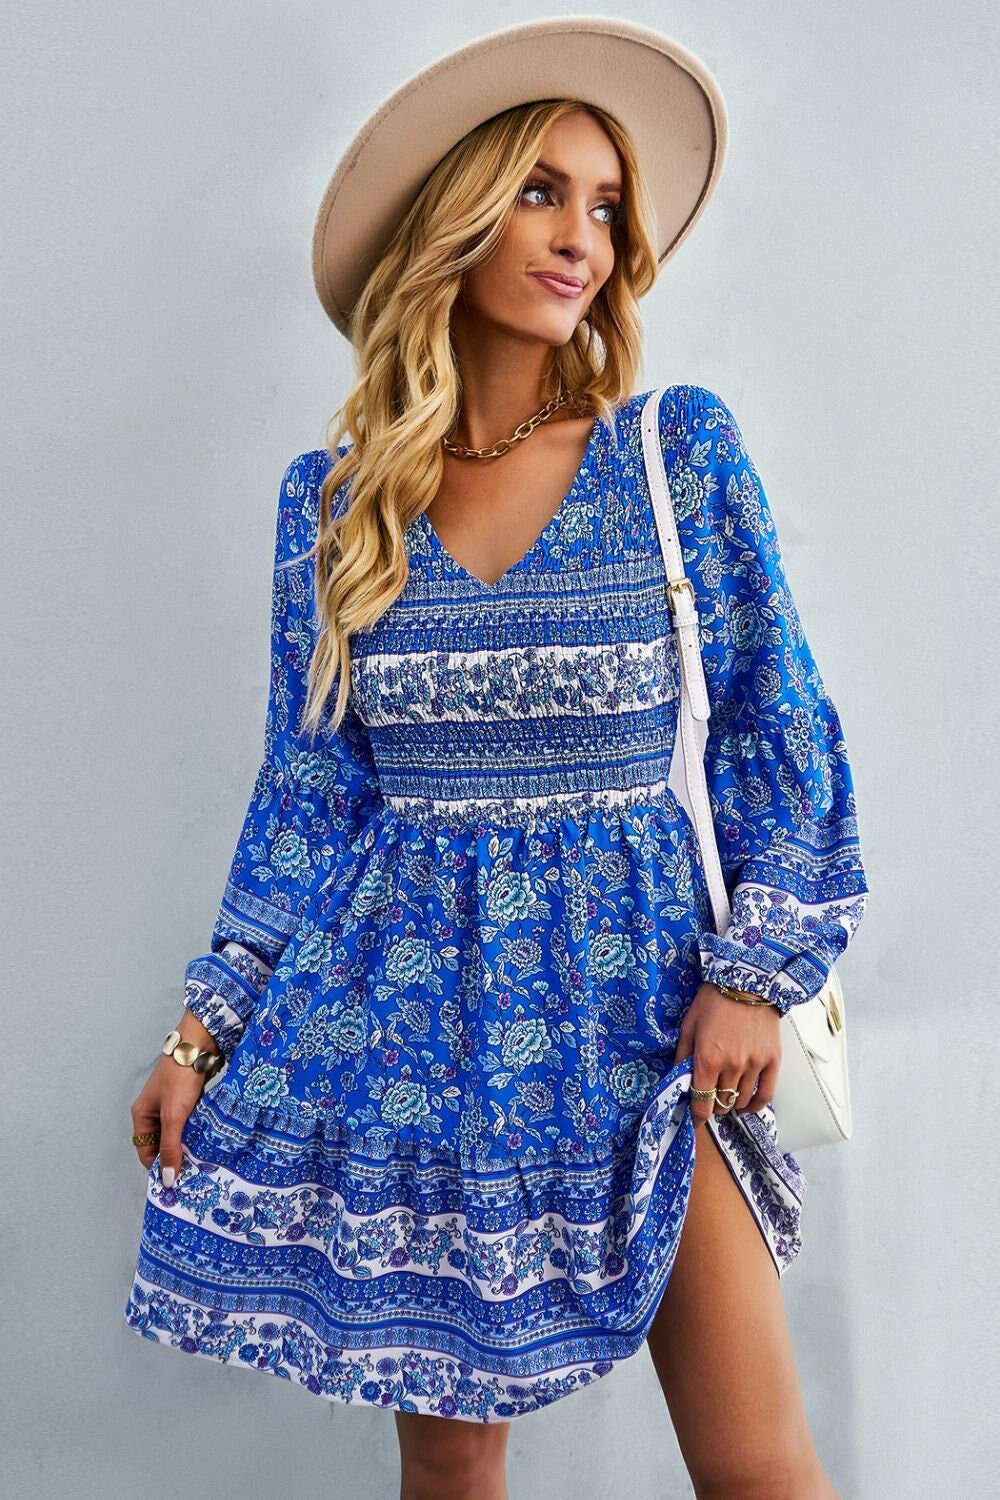 The Best Summer Dresses for this Season | APPAREL GROUP